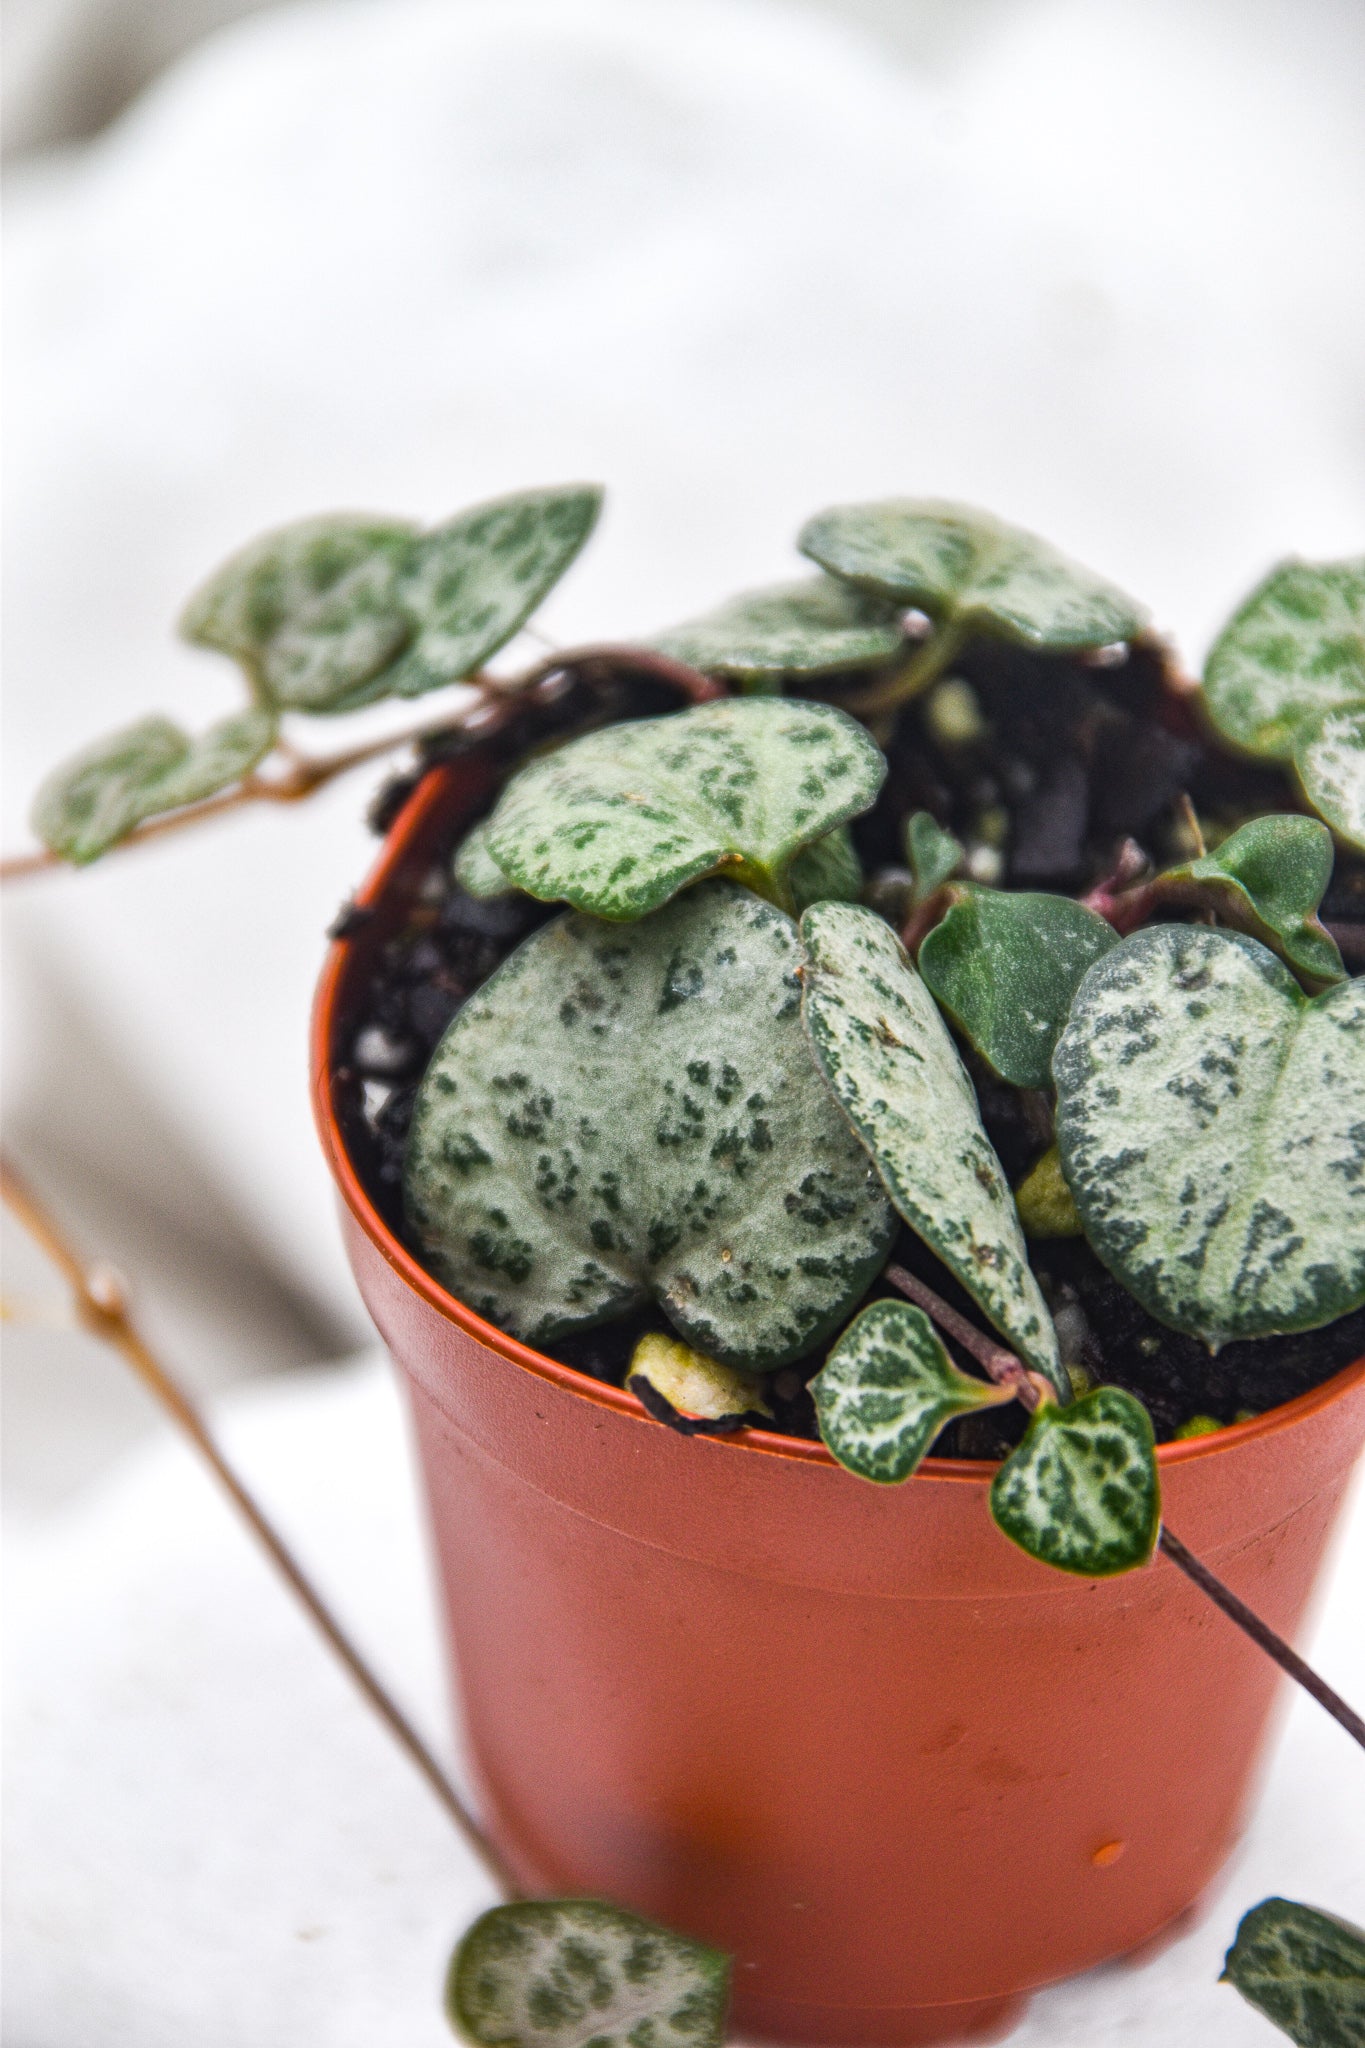 String of Turtles, Peperomia Prostrata plant - Belle's Greenhouse